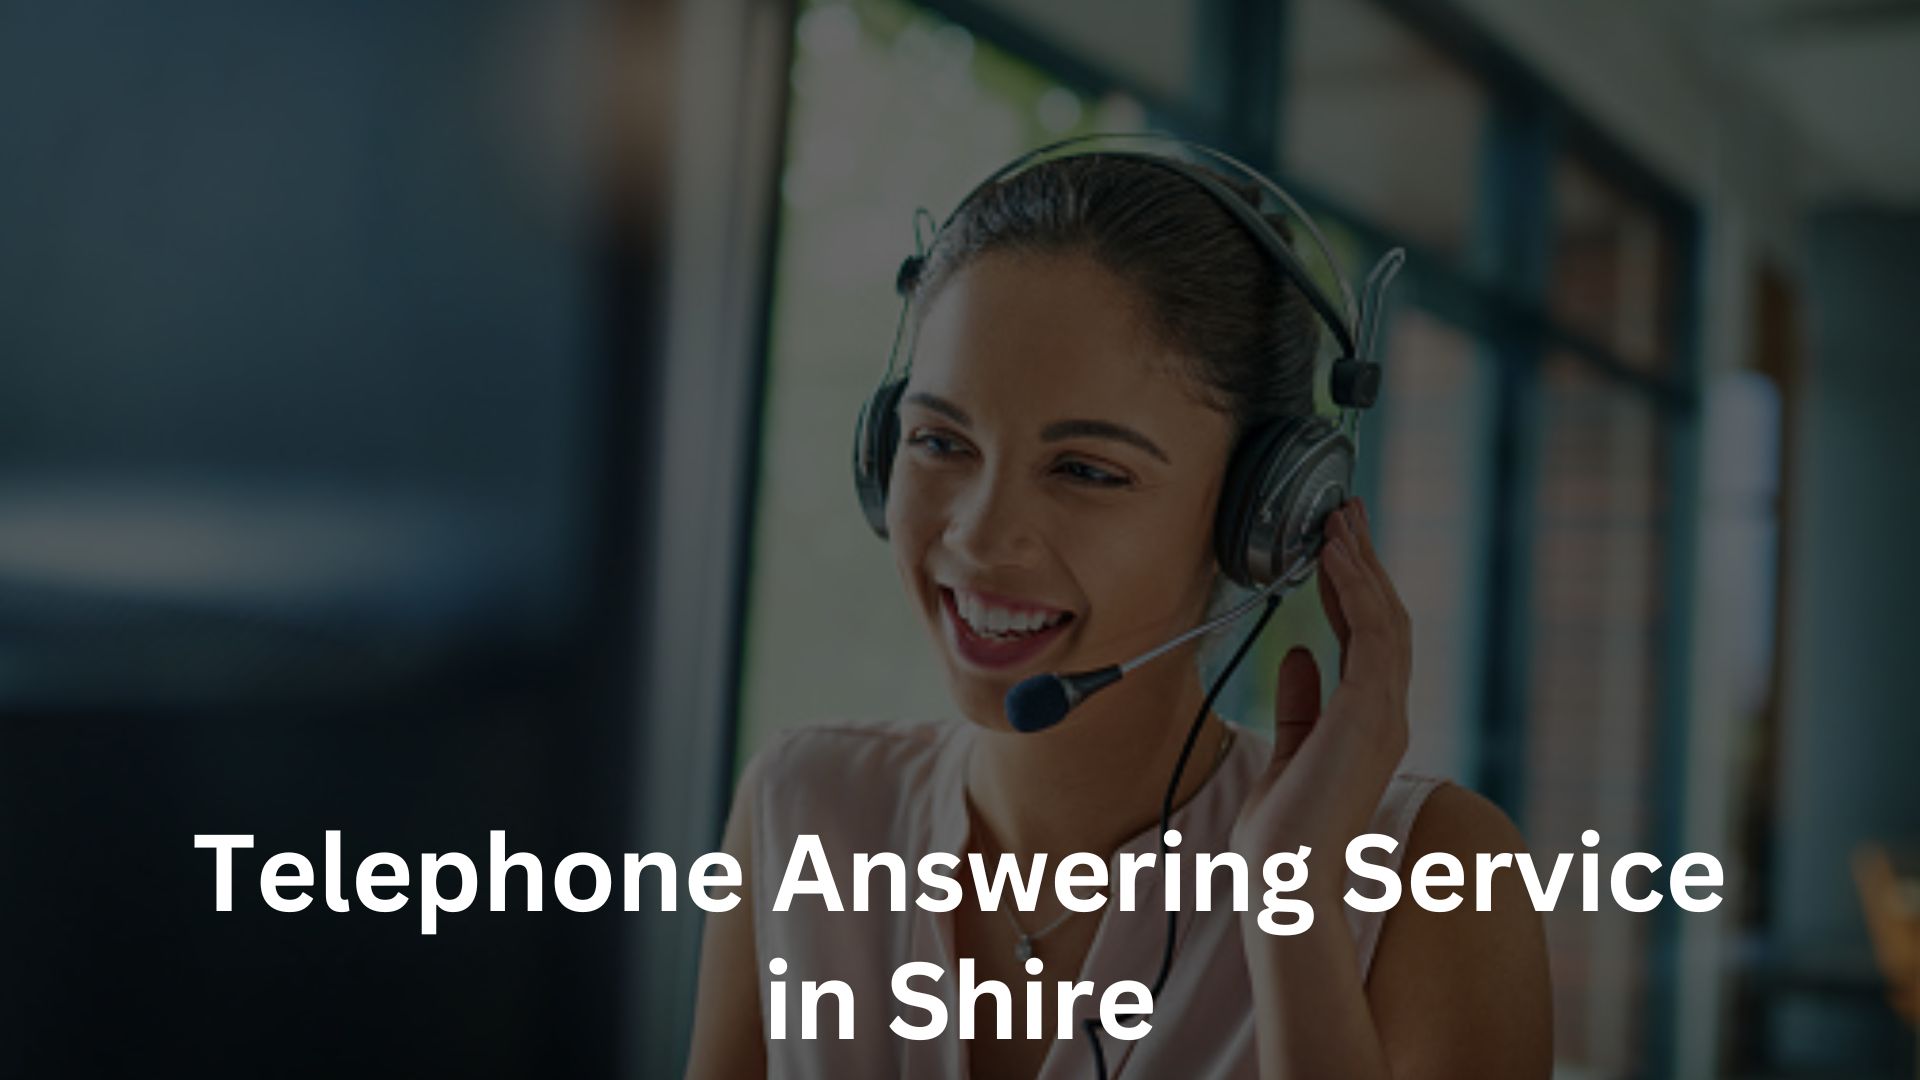 Telephone Answering Service in Shire